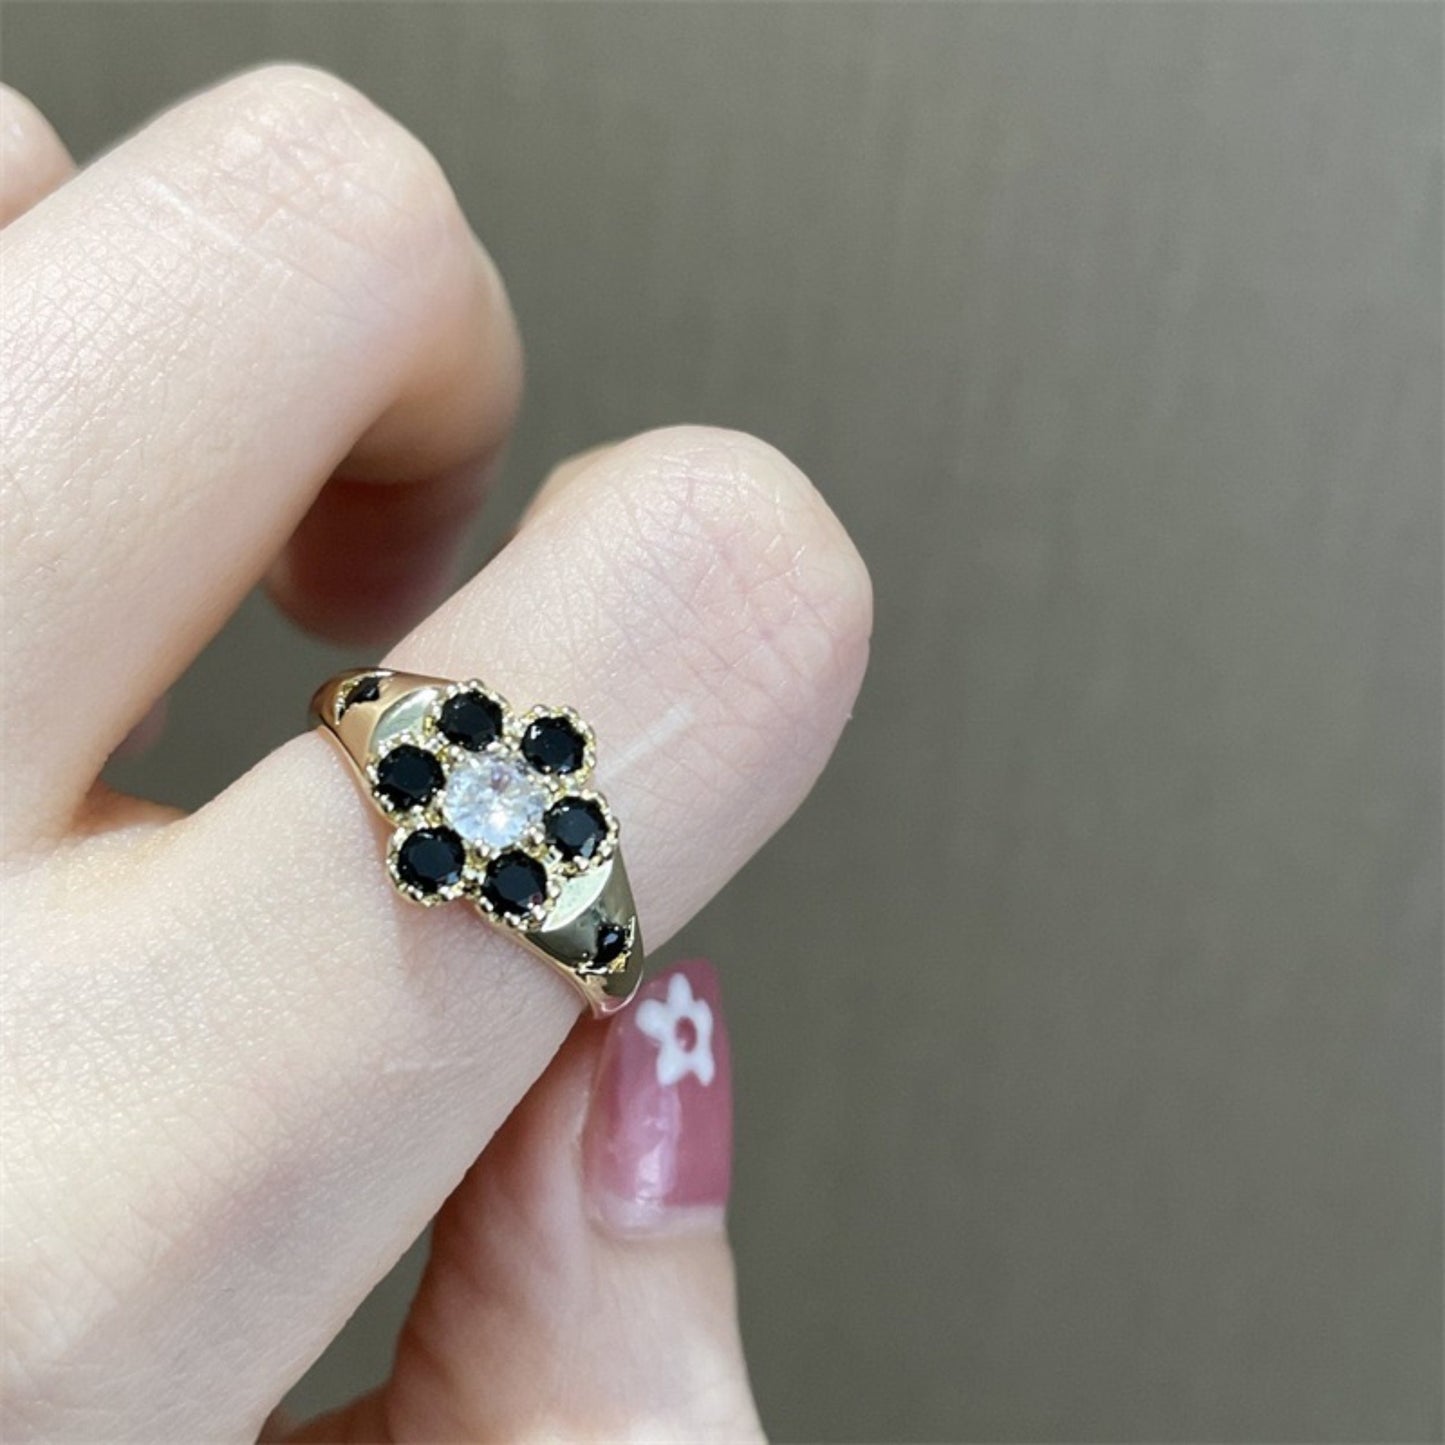 Gothic black statement rings, Chunky unisex cocktail rings, Gold flora rings, Black onyx zircon ring, Stacking rings, Birthstone rings, Gift